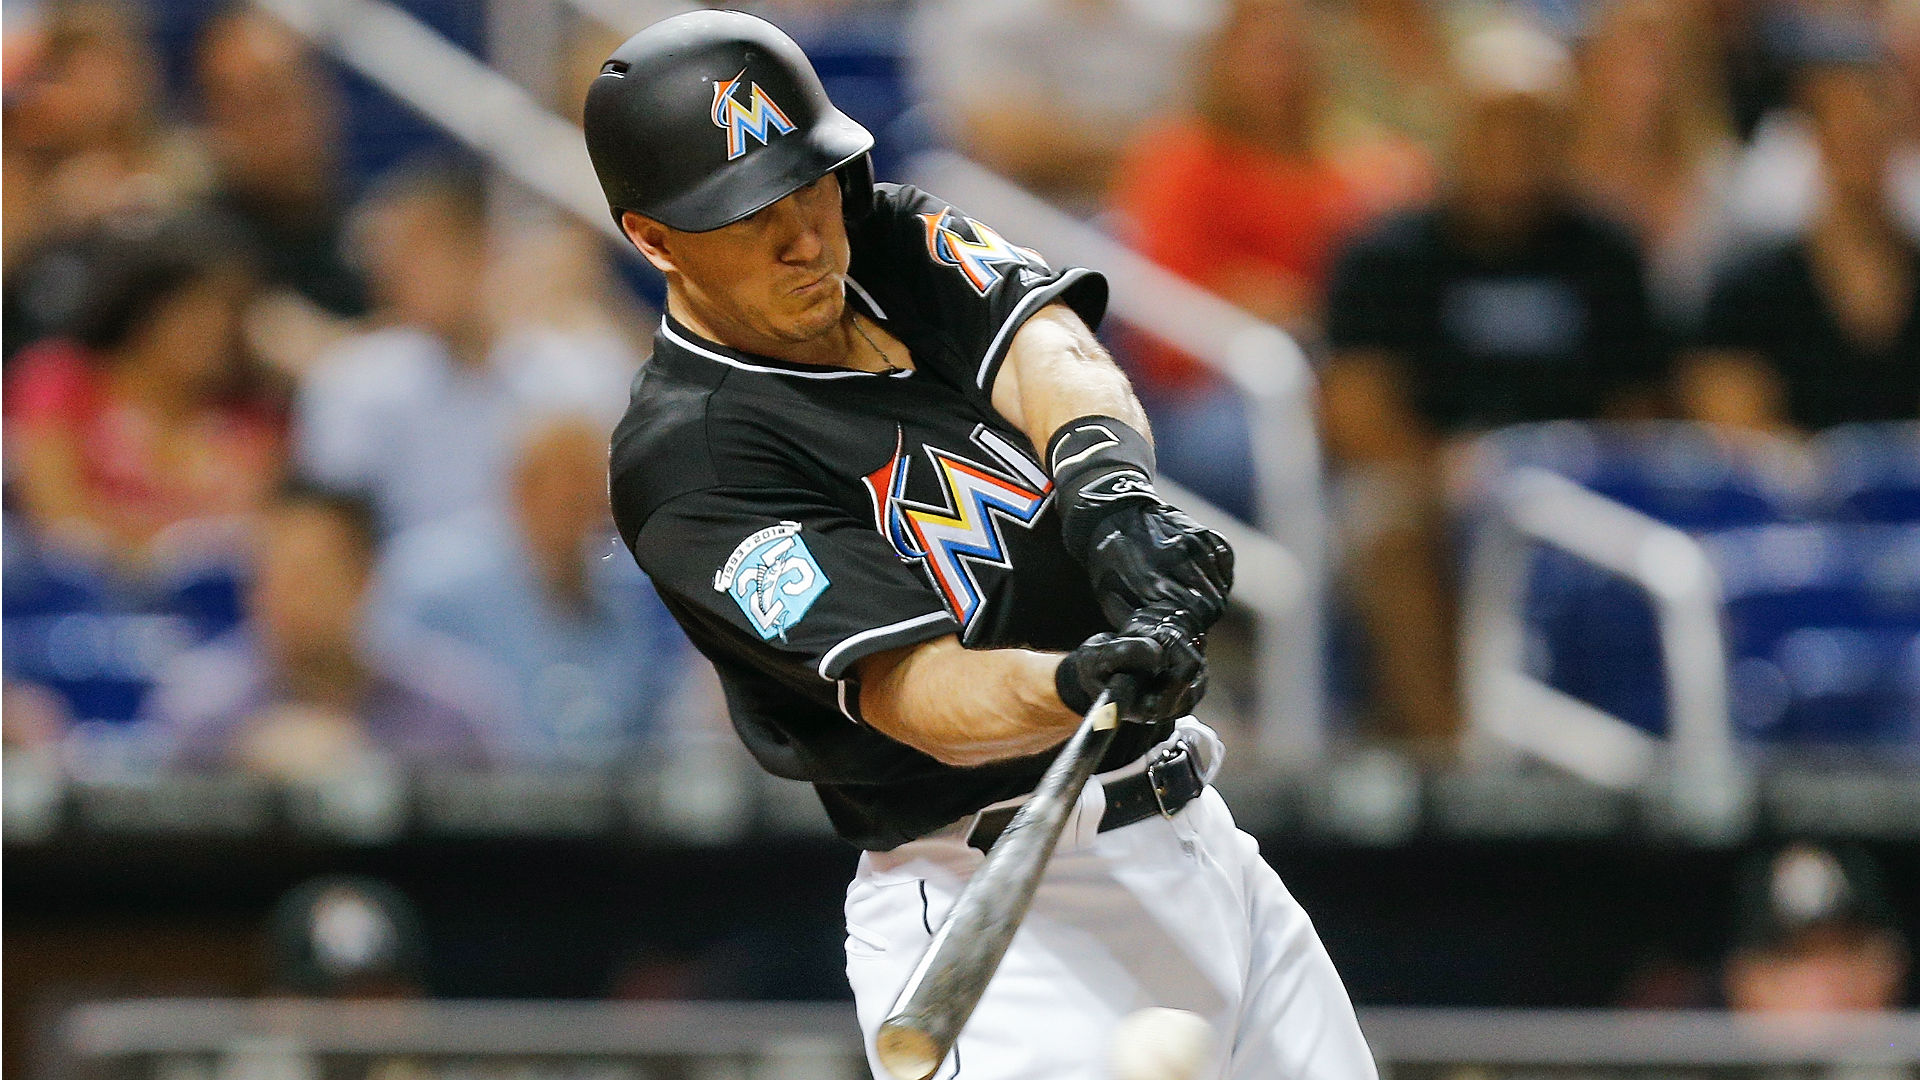 Both New York teams and the Marlins are discussing a deal that would send catcher J.T. Realmuto to the Mets, according to The Athletic.